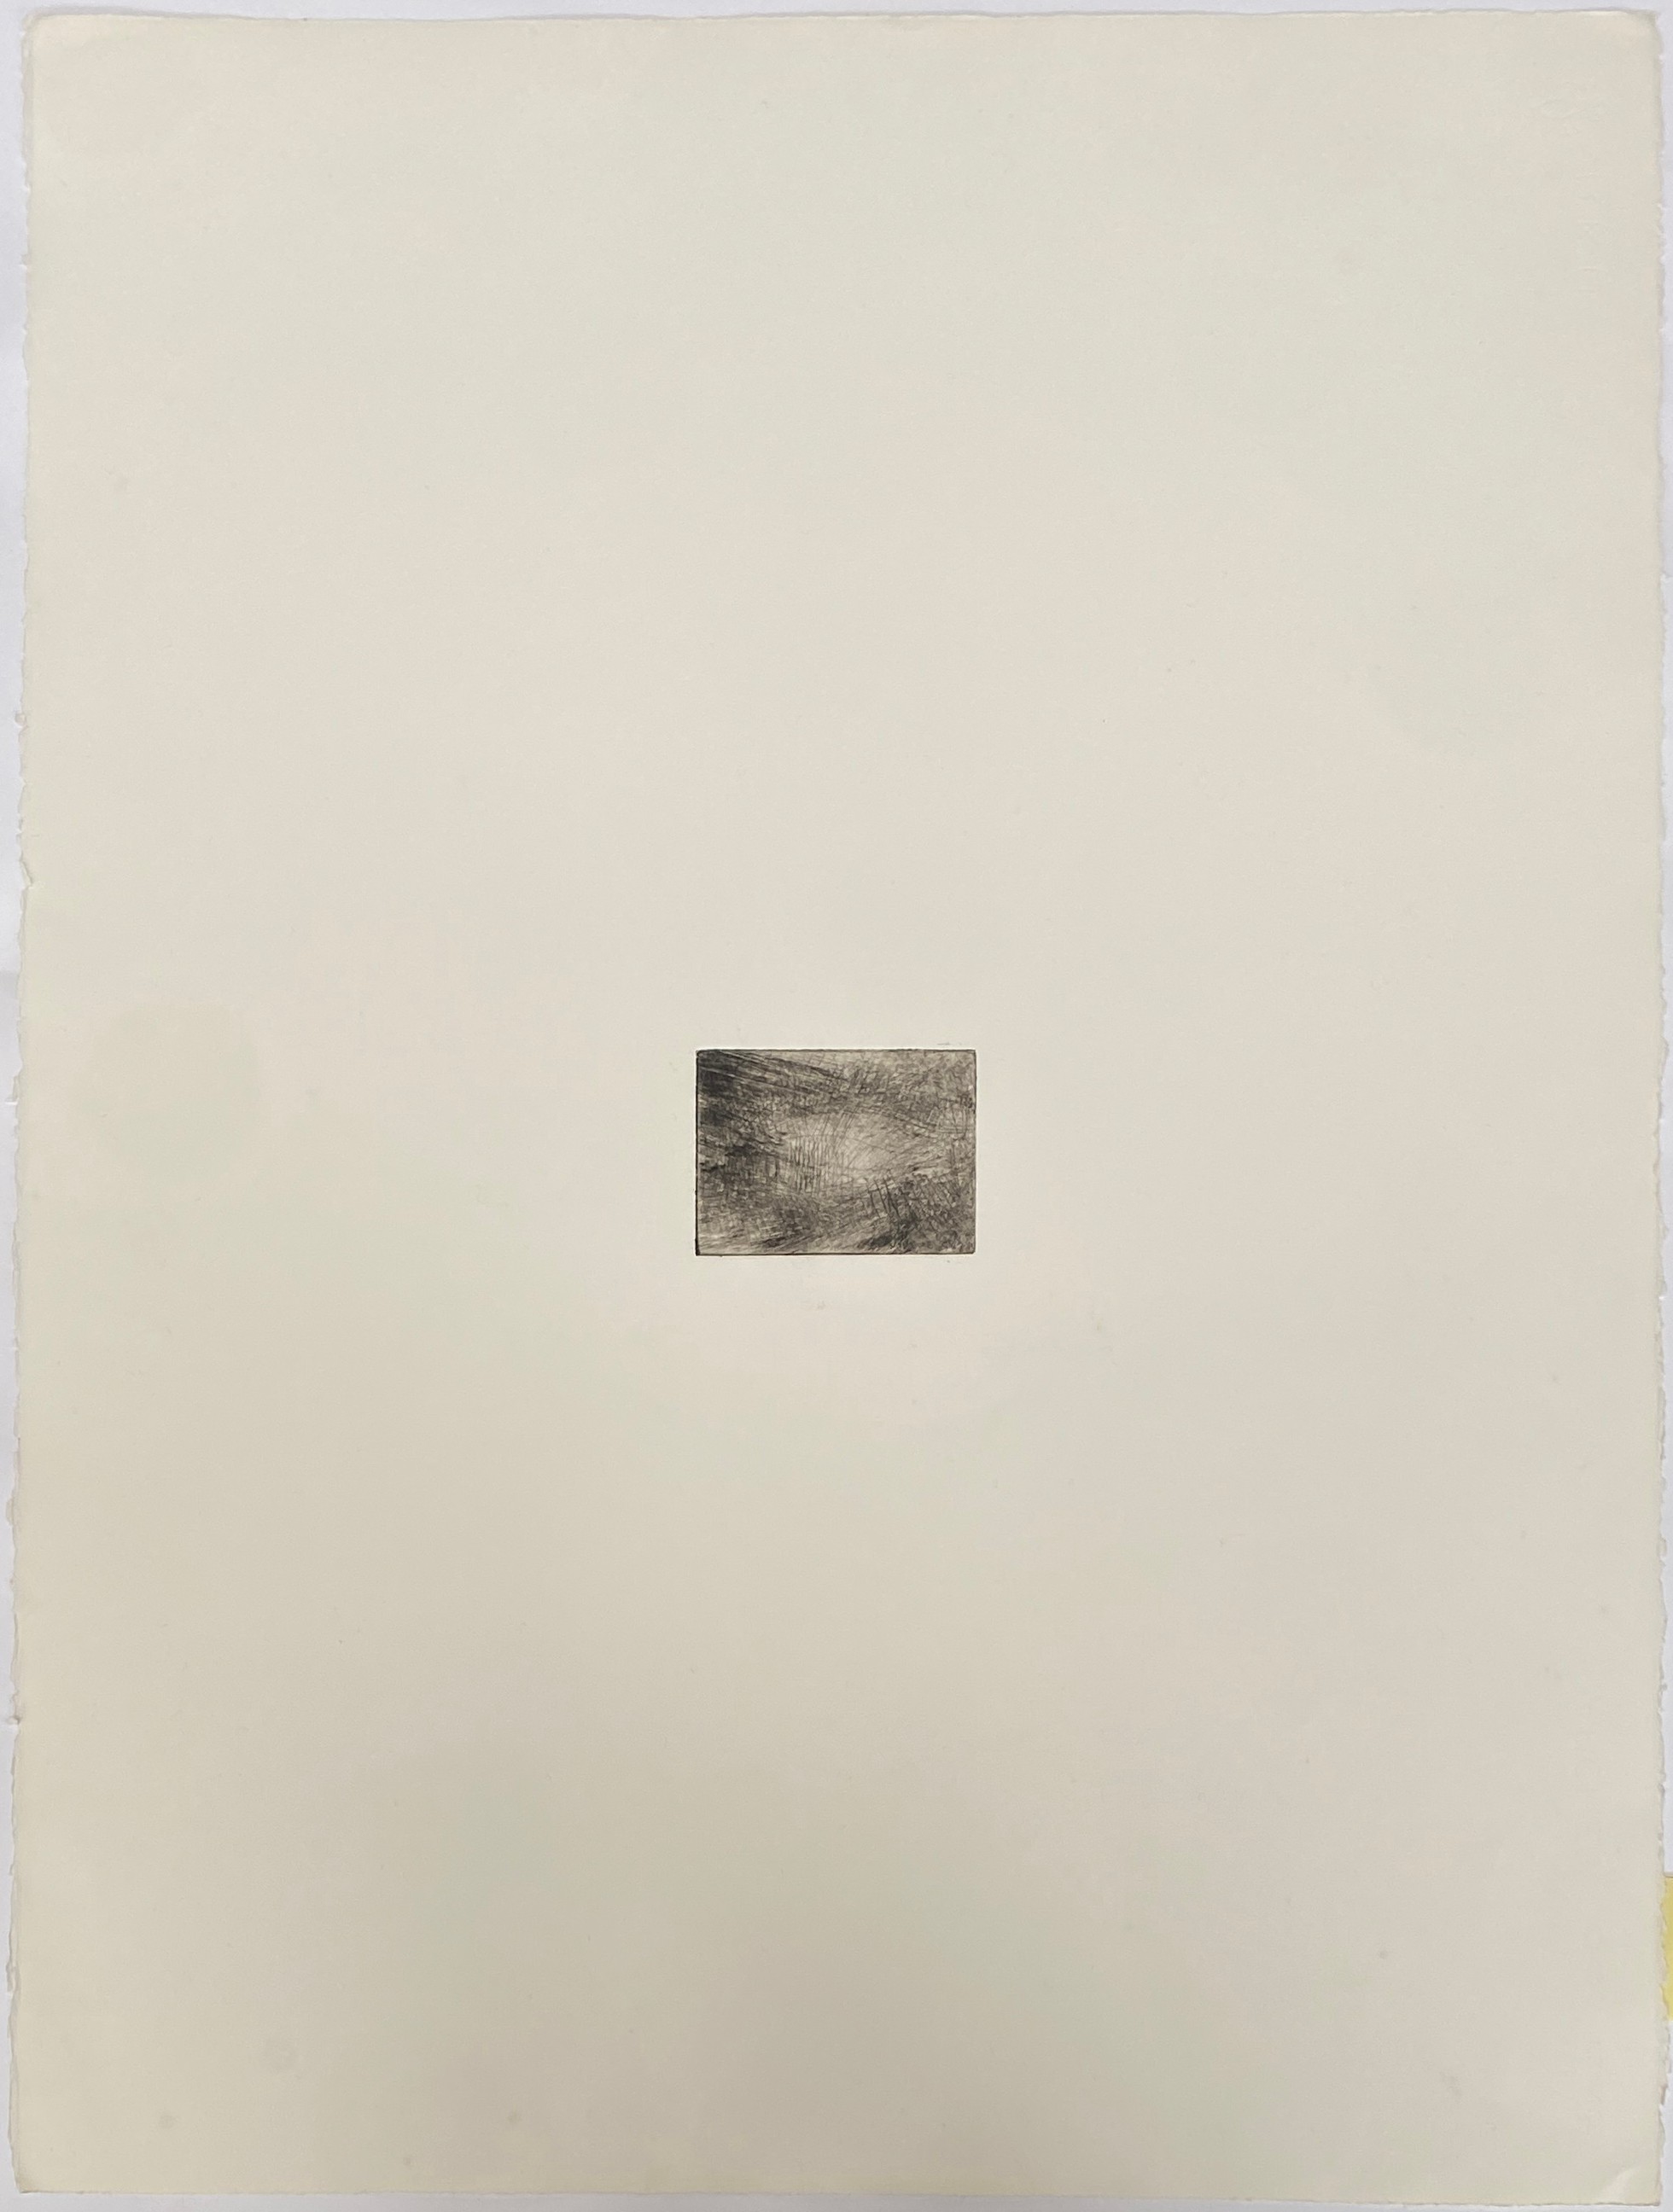 John Virtue (b.1947), Landscape etching, no. 22 var. 2, signed and dated '96 within the plate, the - Image 2 of 2